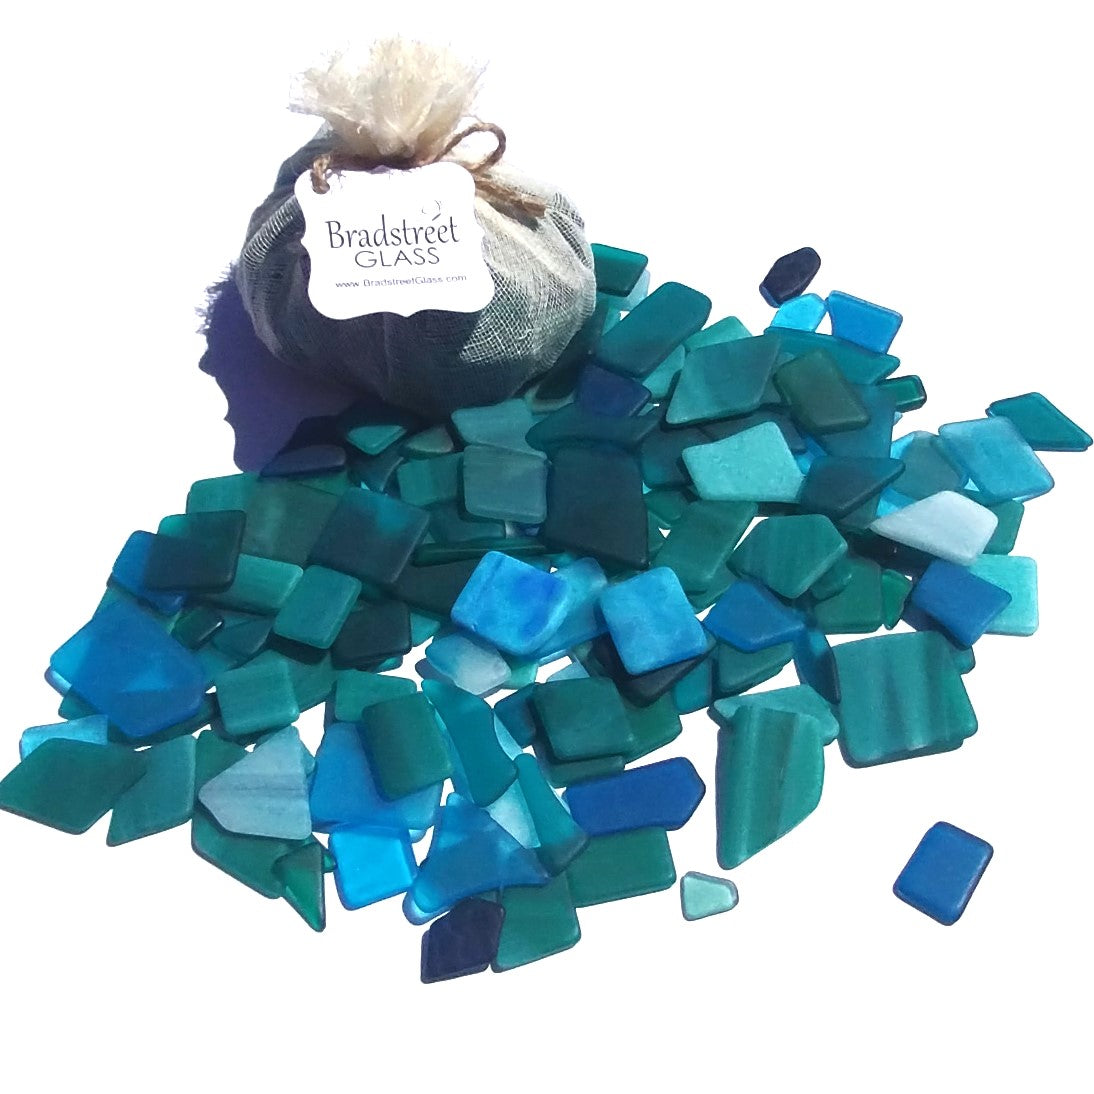 Bradstreet Glass Aqua Blue Teal Green Tumbled Stained Glass 1/2 pound "Sea Glass" in Shades of Teal and Aqua